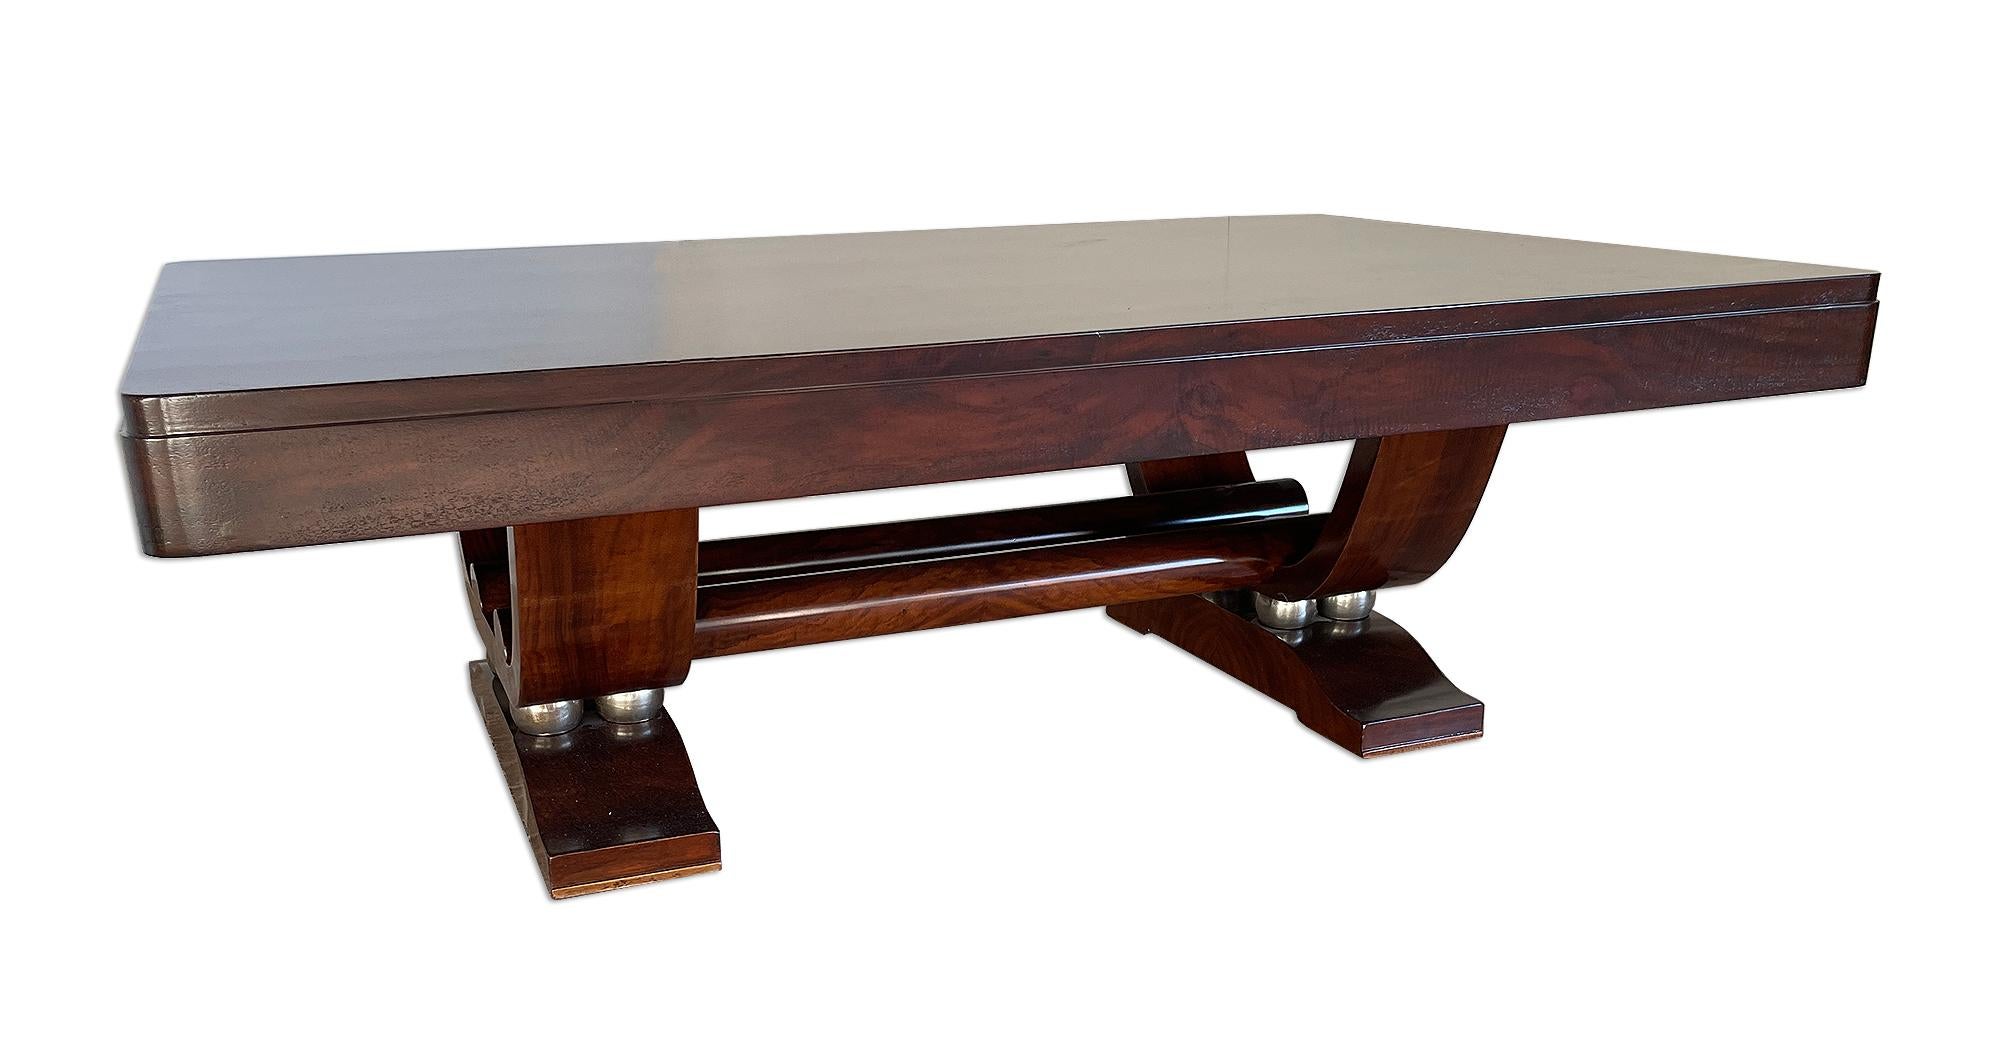 Beautiful and impressive ArtDeco coffee Table - Attributed to Rene Prou, France 1930 1940

This beautiful Art Deco coffee table is in a burl walnut veneer. The table has been restored, refinished and is in very good condition.

There are two brushed